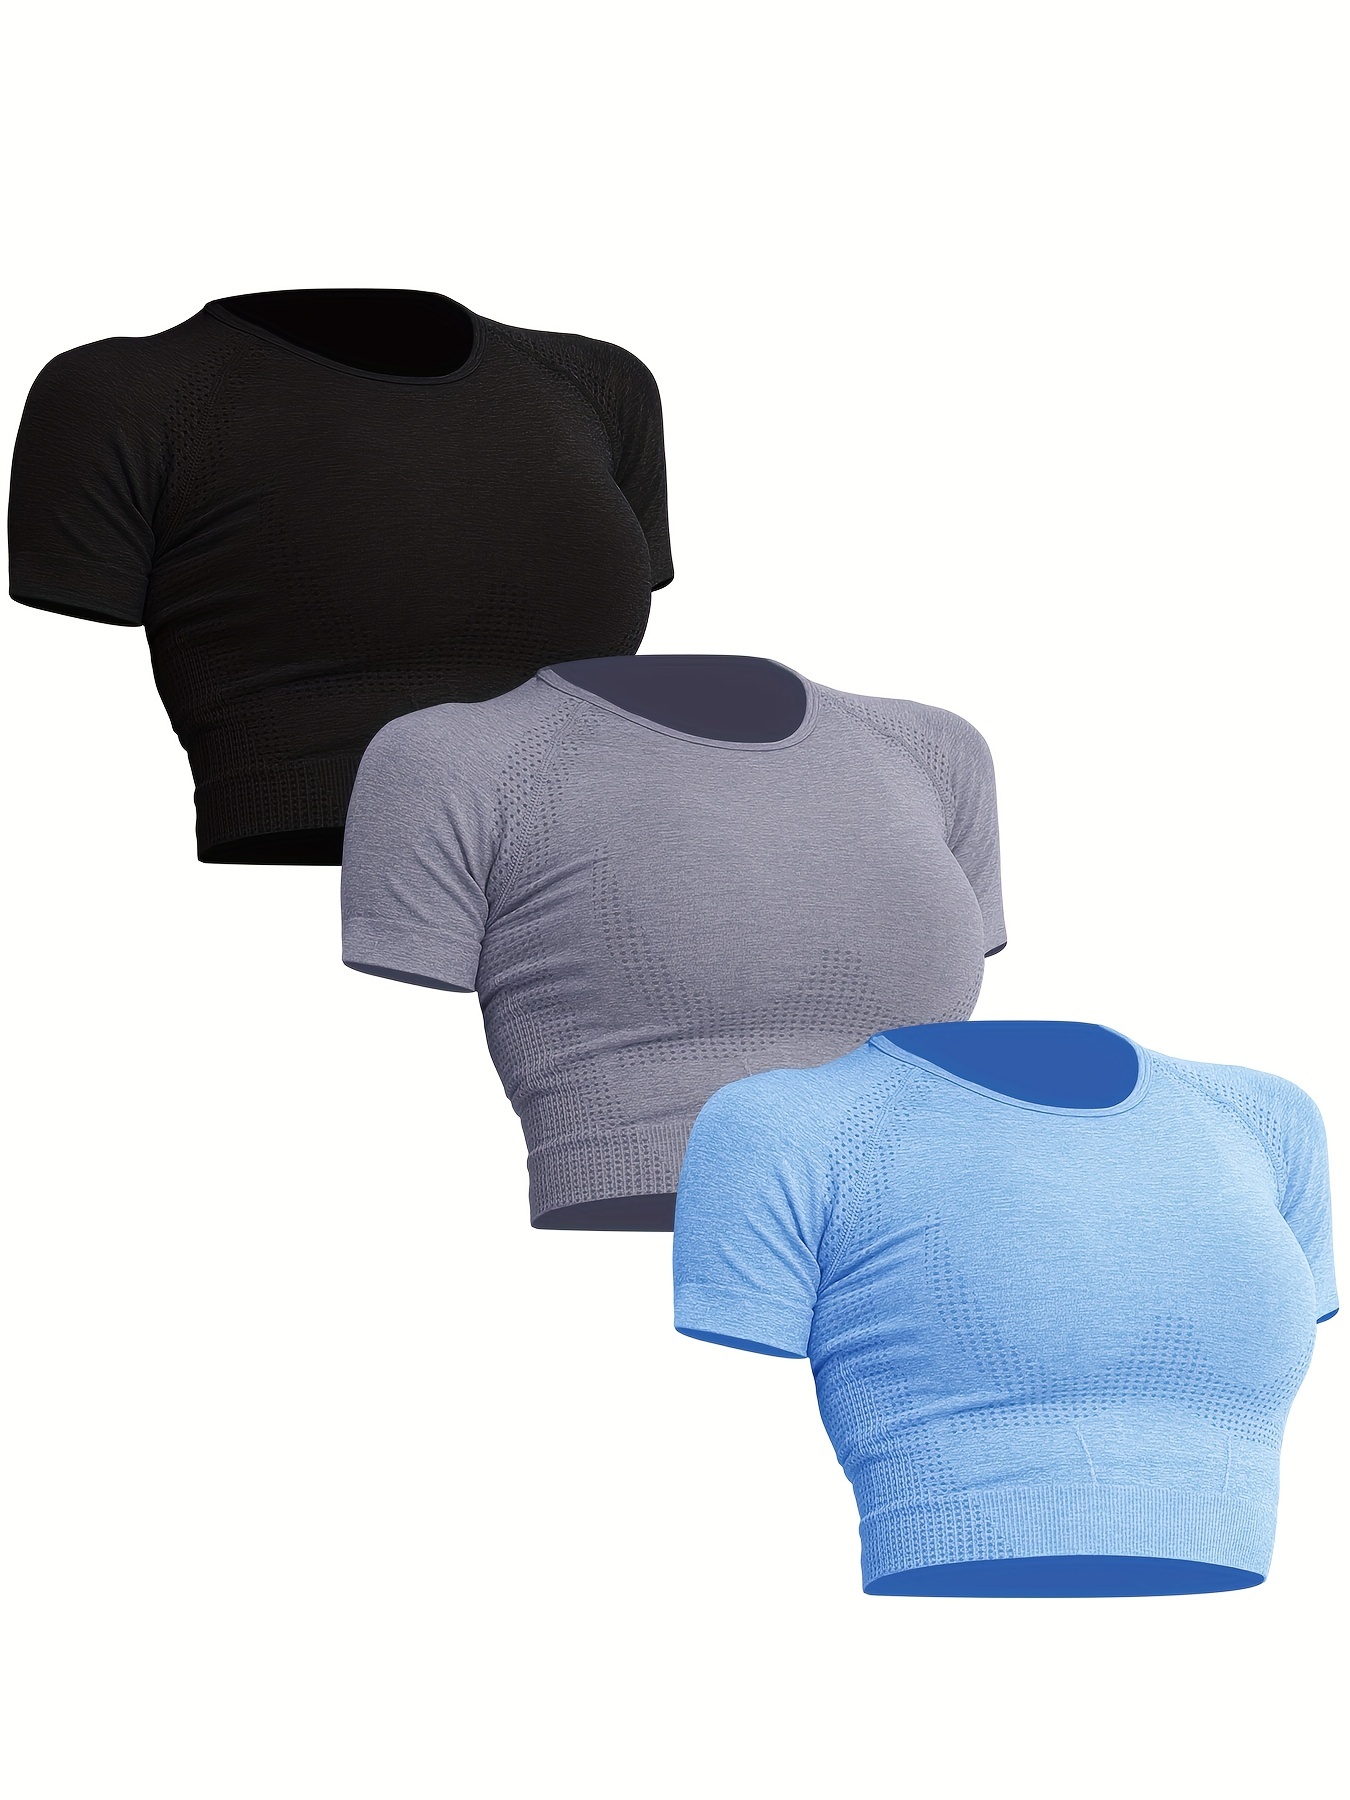  Women Workout Crop Top Scoop Neck Shirt Athletic Yoga Short  Sleeve Fitness Tight Tee Cropped Tank Tops for Teen Girls Black : Sports &  Outdoors